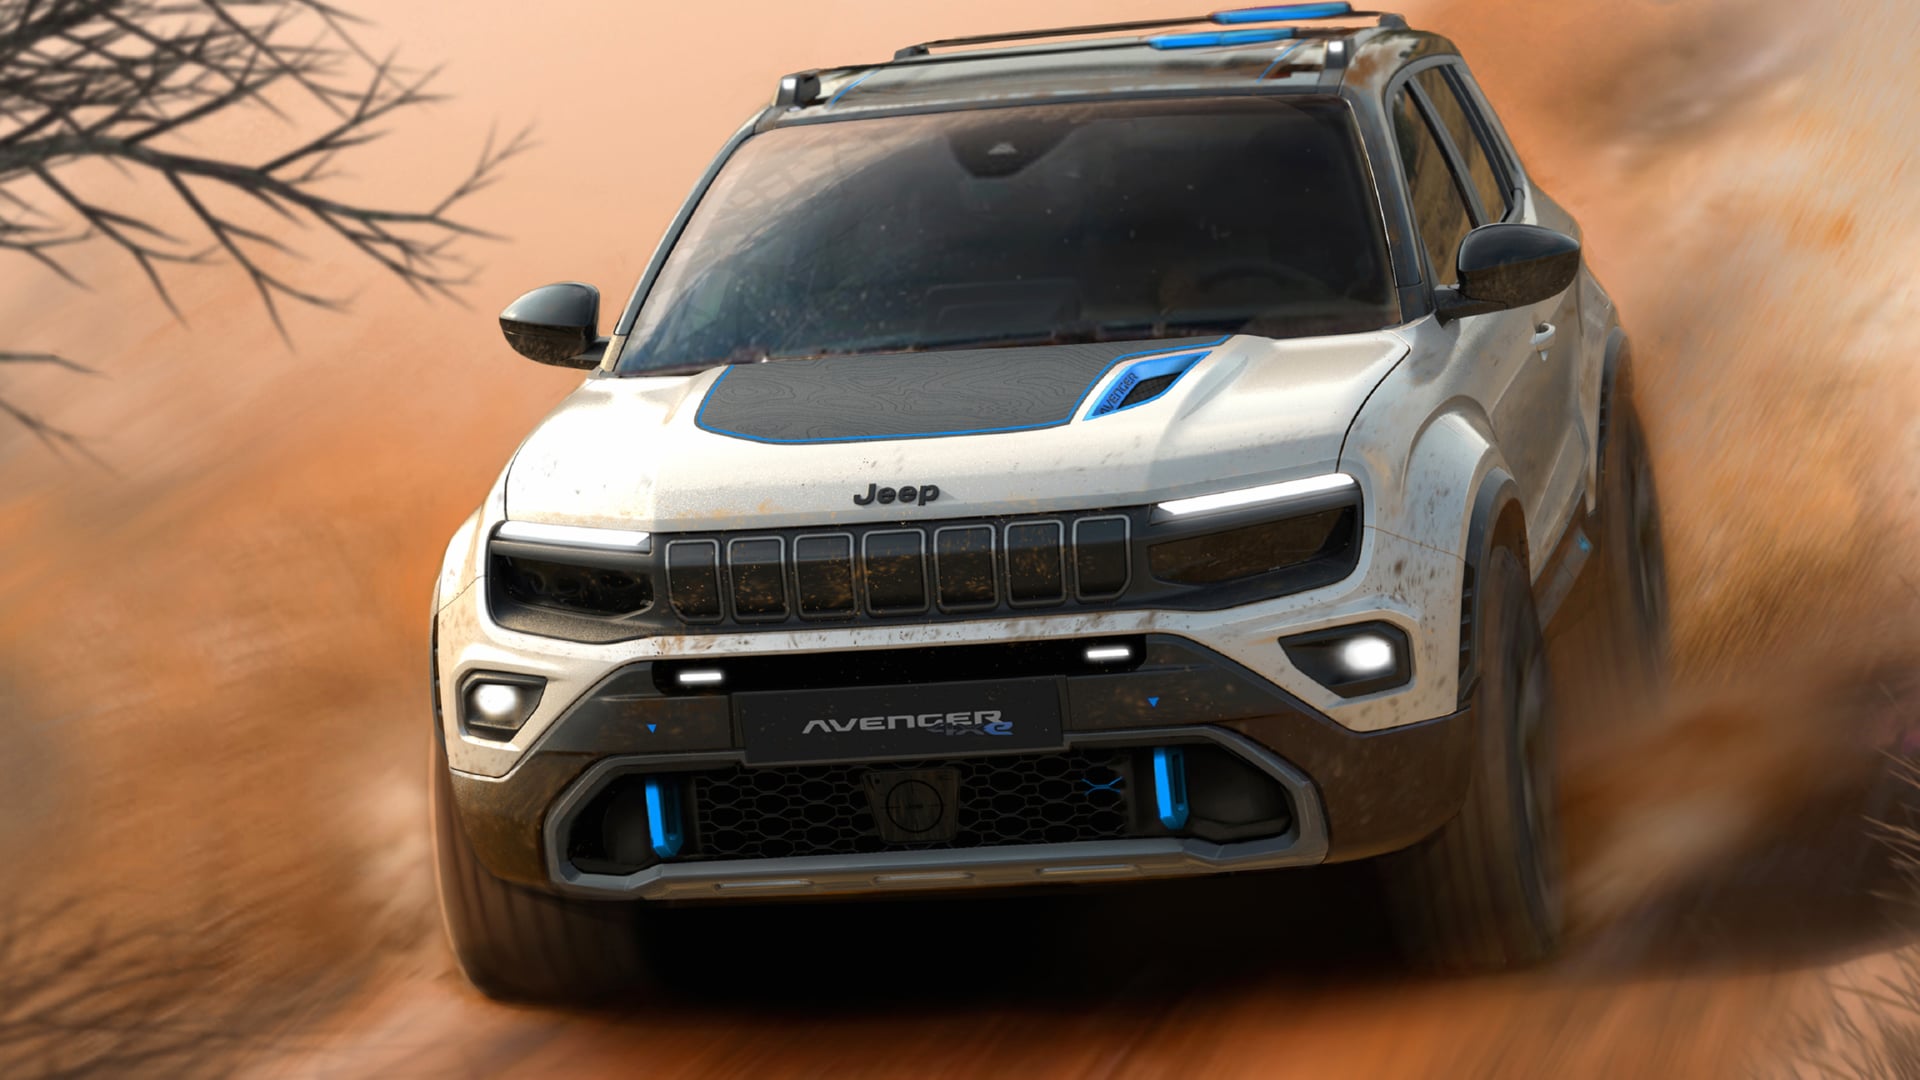 Jeep Avenger 4x4 Concept wallpapers HD quality